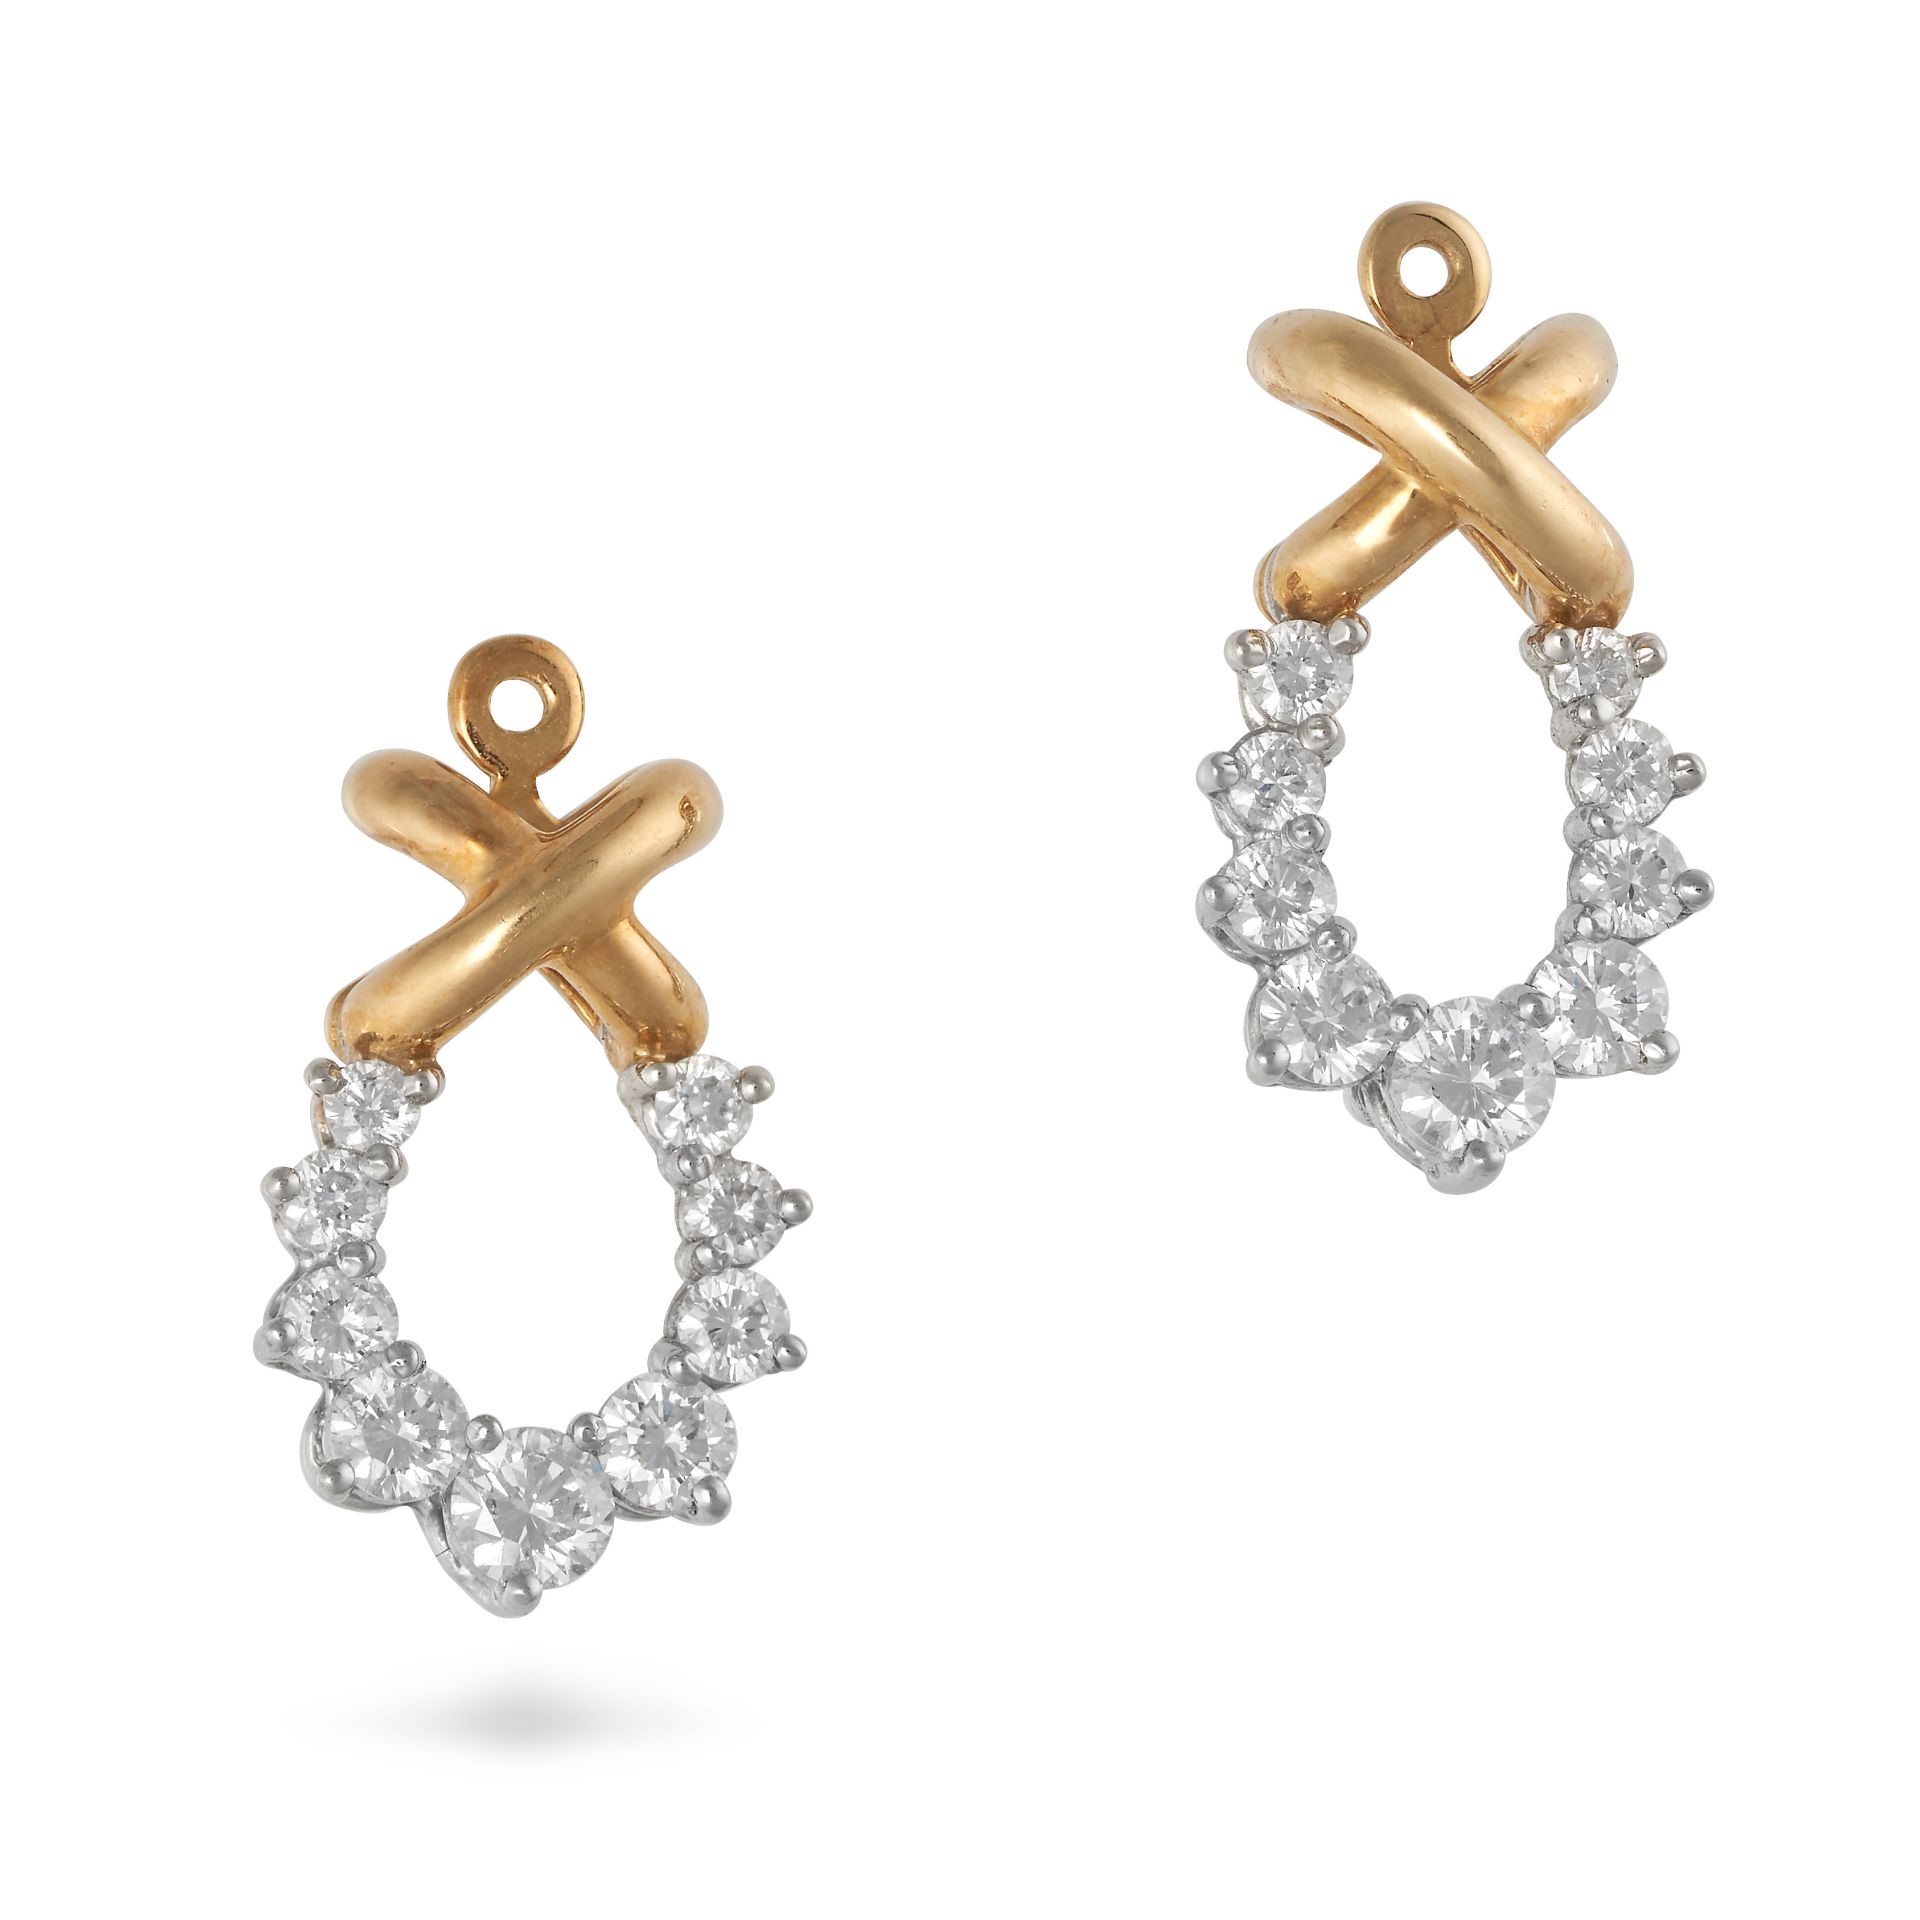 TIFFANY & CO., A PAIR OF DIAMOND EAR PENDANTS in 18ct yellow gold and platinum, each comprising a...